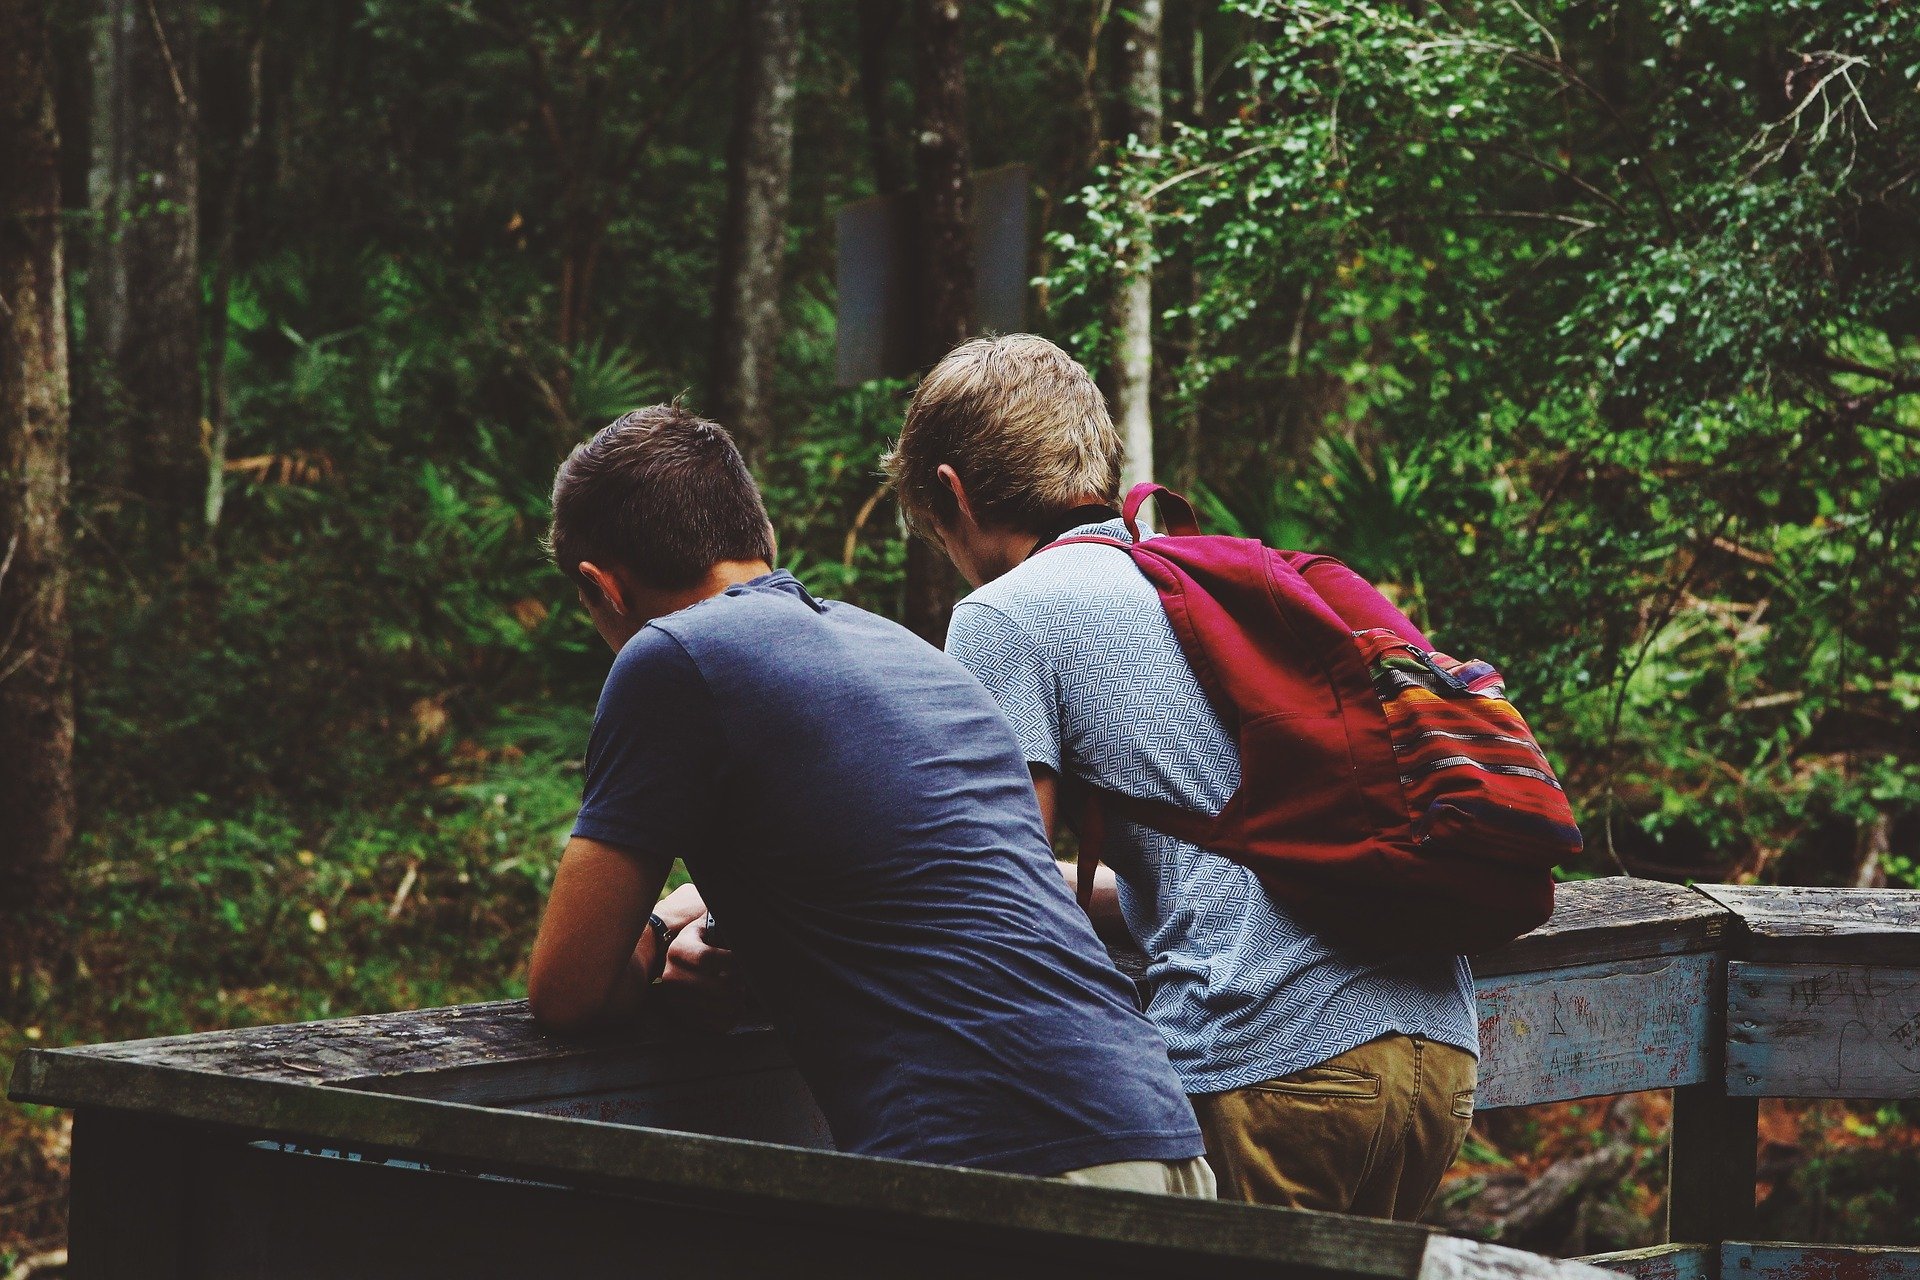  two young men on a nature overlook